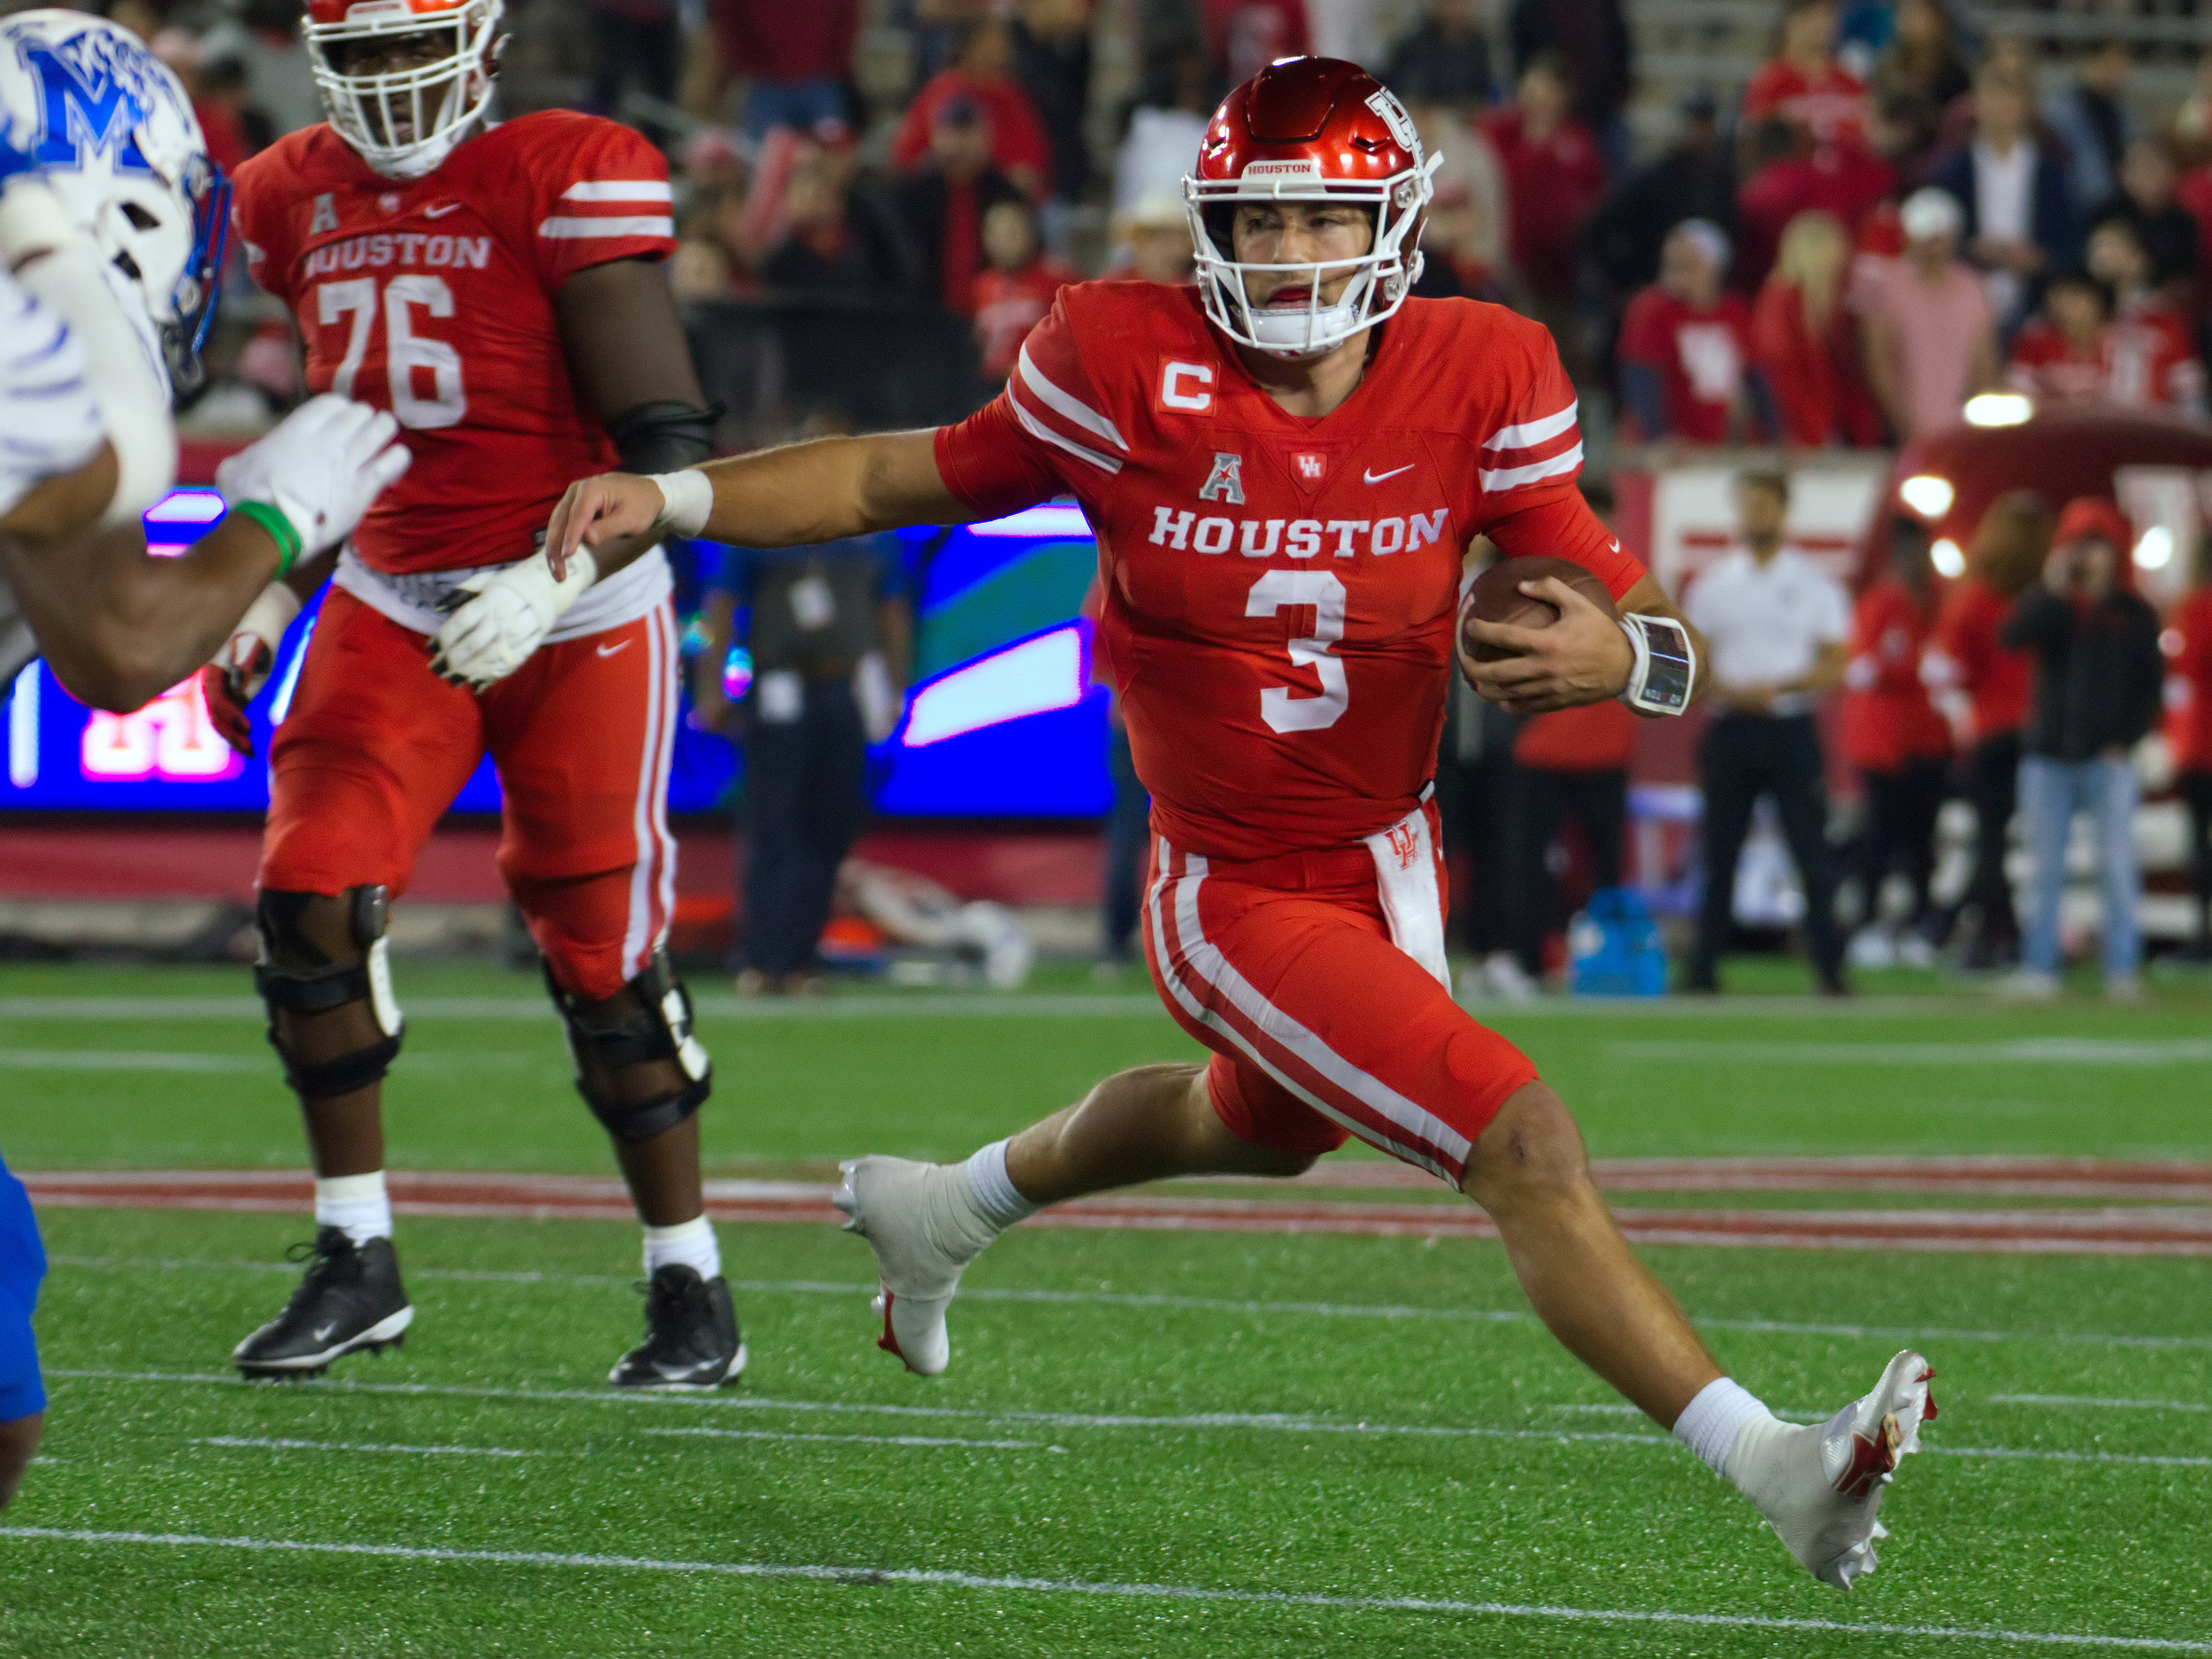 UH junior quarterback Clayton Tune finished the regular season throwing for 3,013 yards and 26 touchdowns. | Steven Paultanis/The Cougar